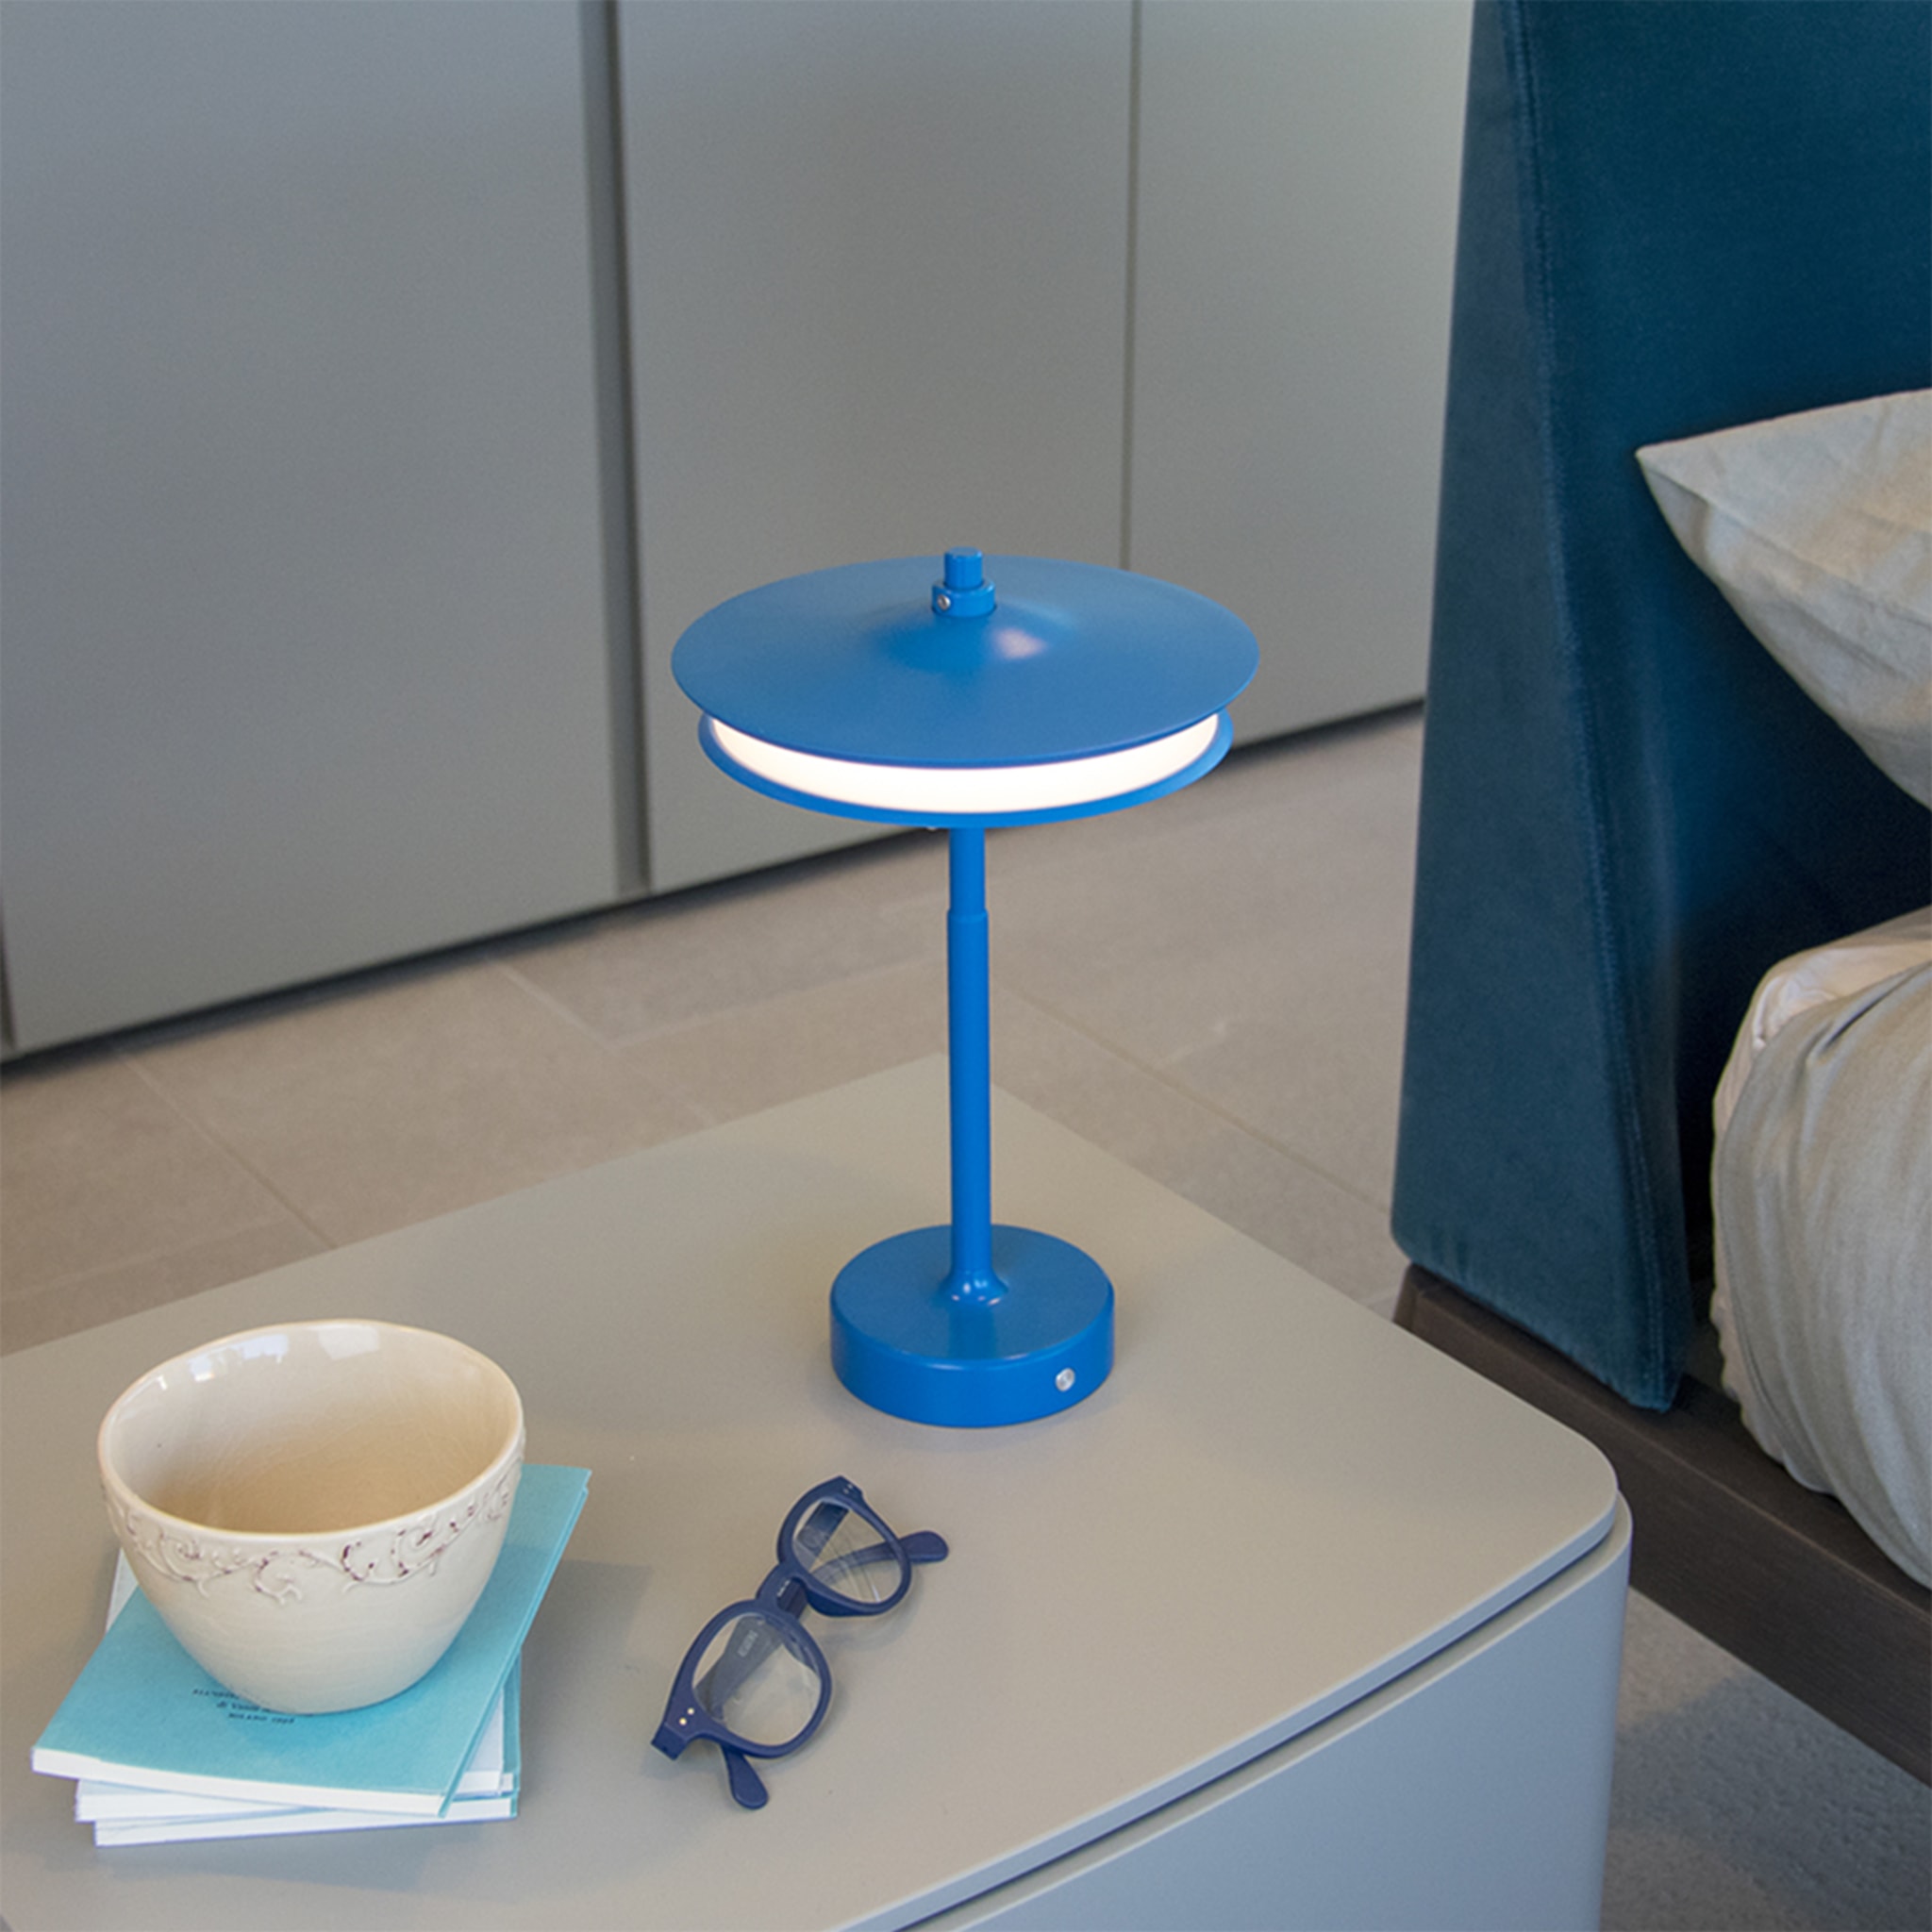 Drum Blue Rechargeable Table Lamp by Albore Design - Alternative view 4